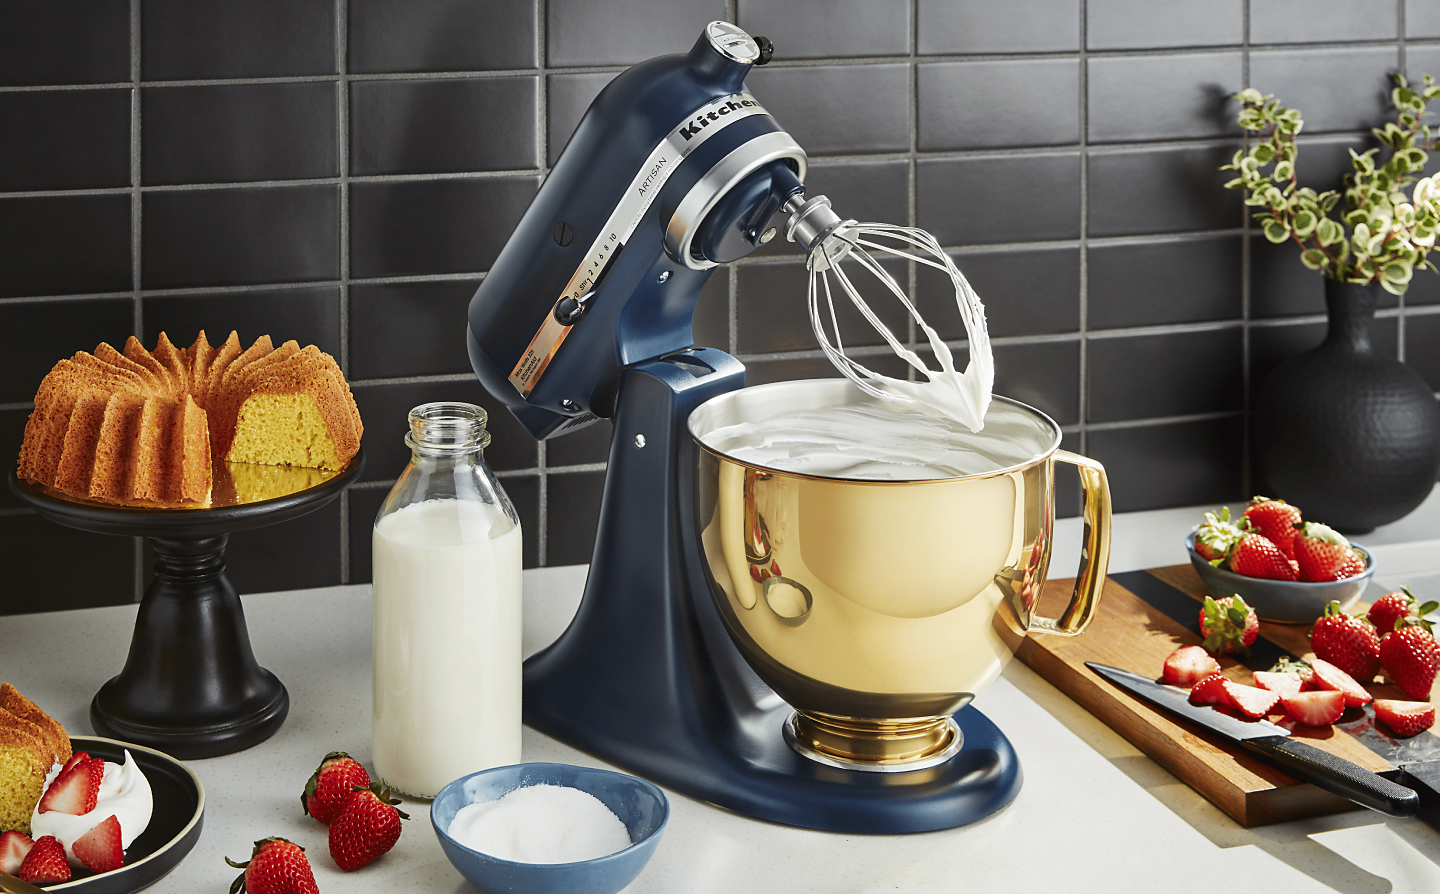 https://kitchenaid-h.assetsadobe.com/is/image/content/dam/business-unit/kitchenaid/en-us/marketing-content/site-assets/page-content/pinch-of-help/how-to-customize-a-stand-mixer-and-choose-colors/Image%201.jpg?fmt=png-alpha&qlt=85,0&resMode=sharp2&op_usm=1.75,0.3,2,0&scl=1&constrain=fit,1